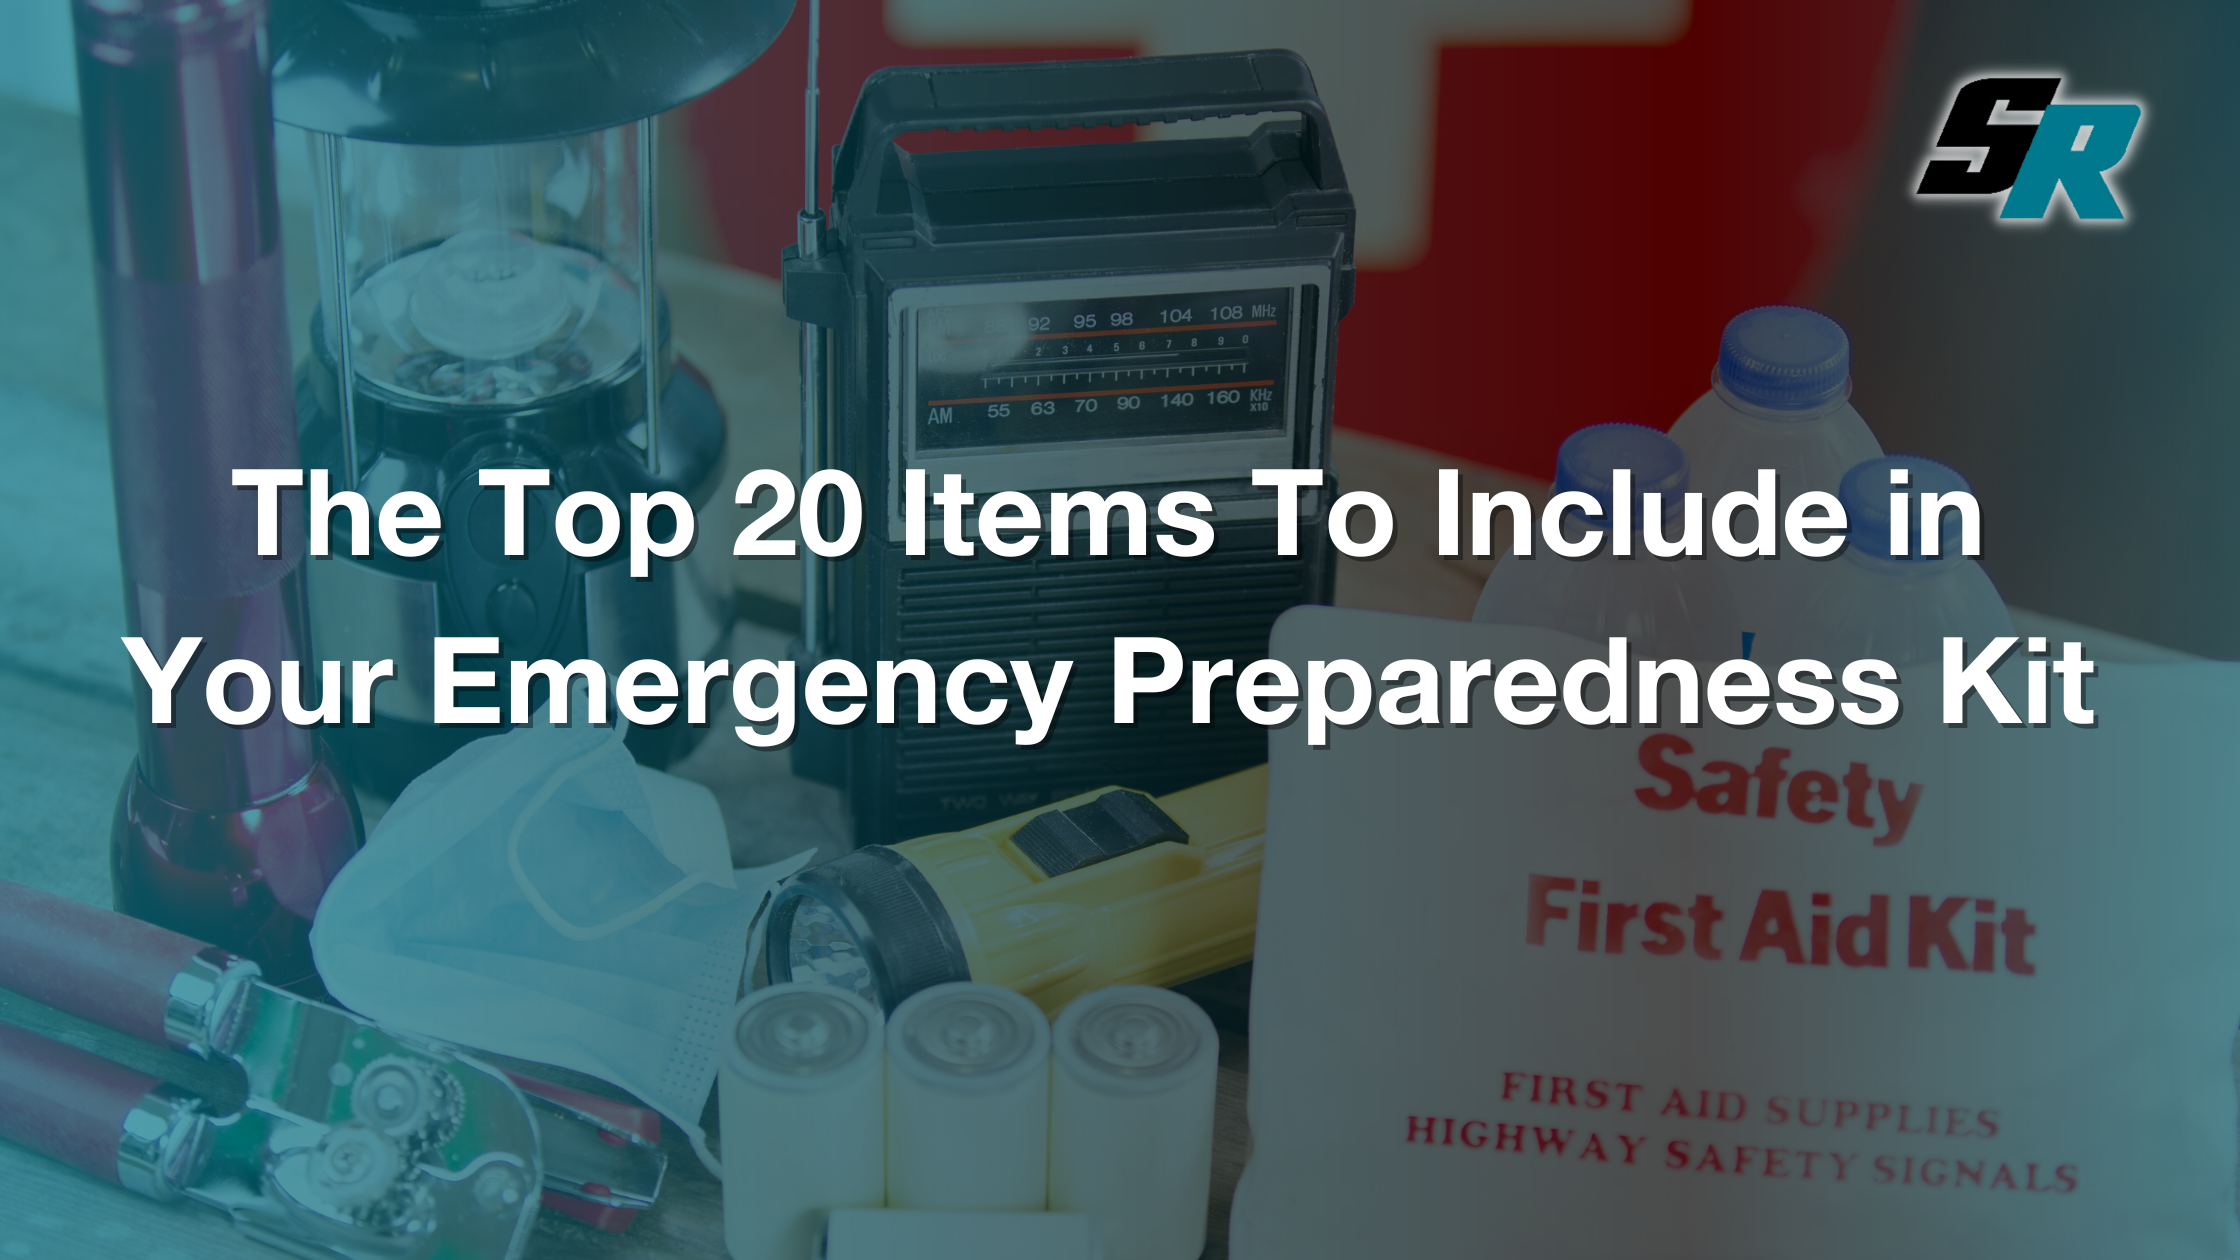 The Top 20 Items To Include in an Emergency Preparedness Kit